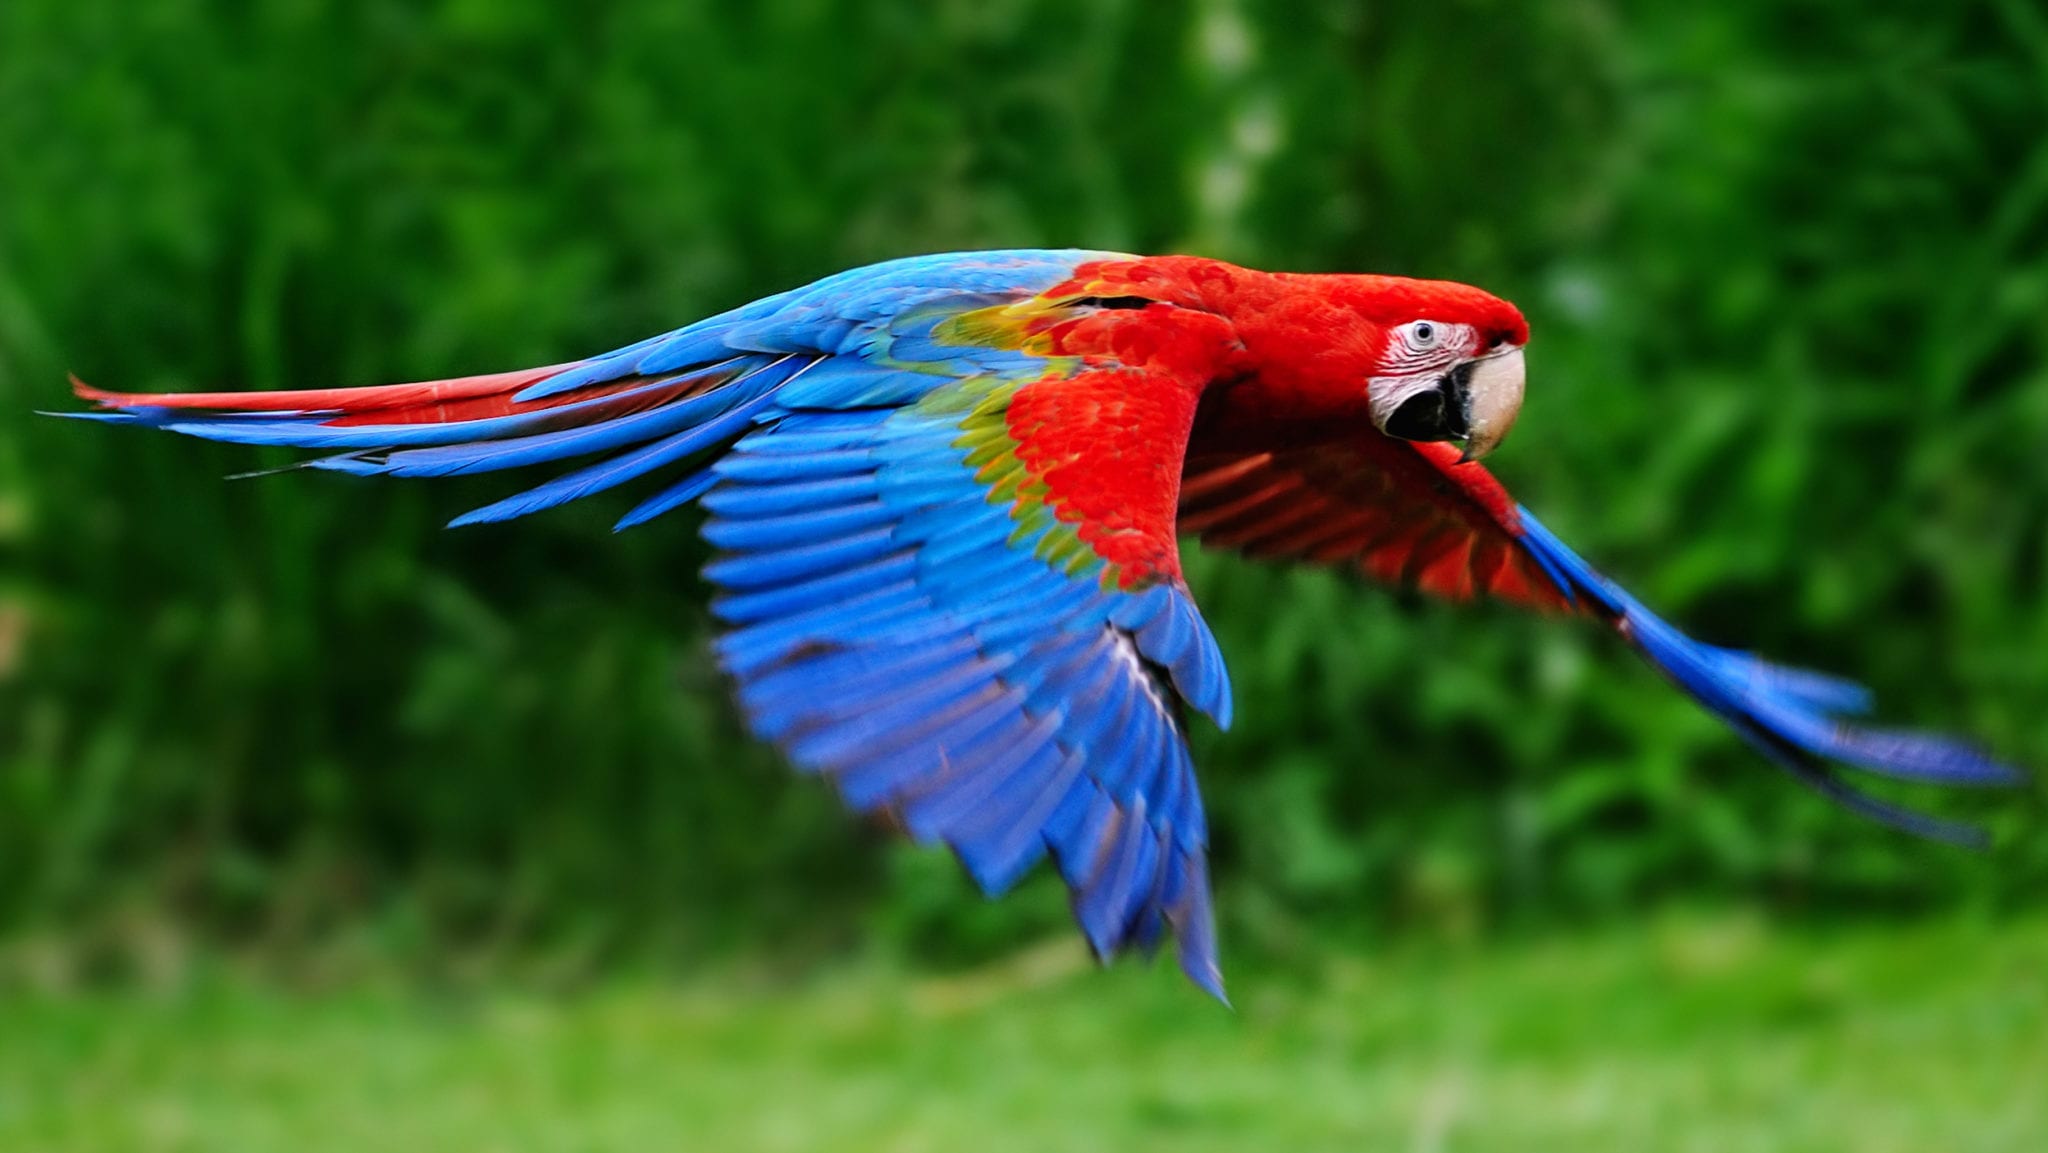 Red and blue parrot in flight